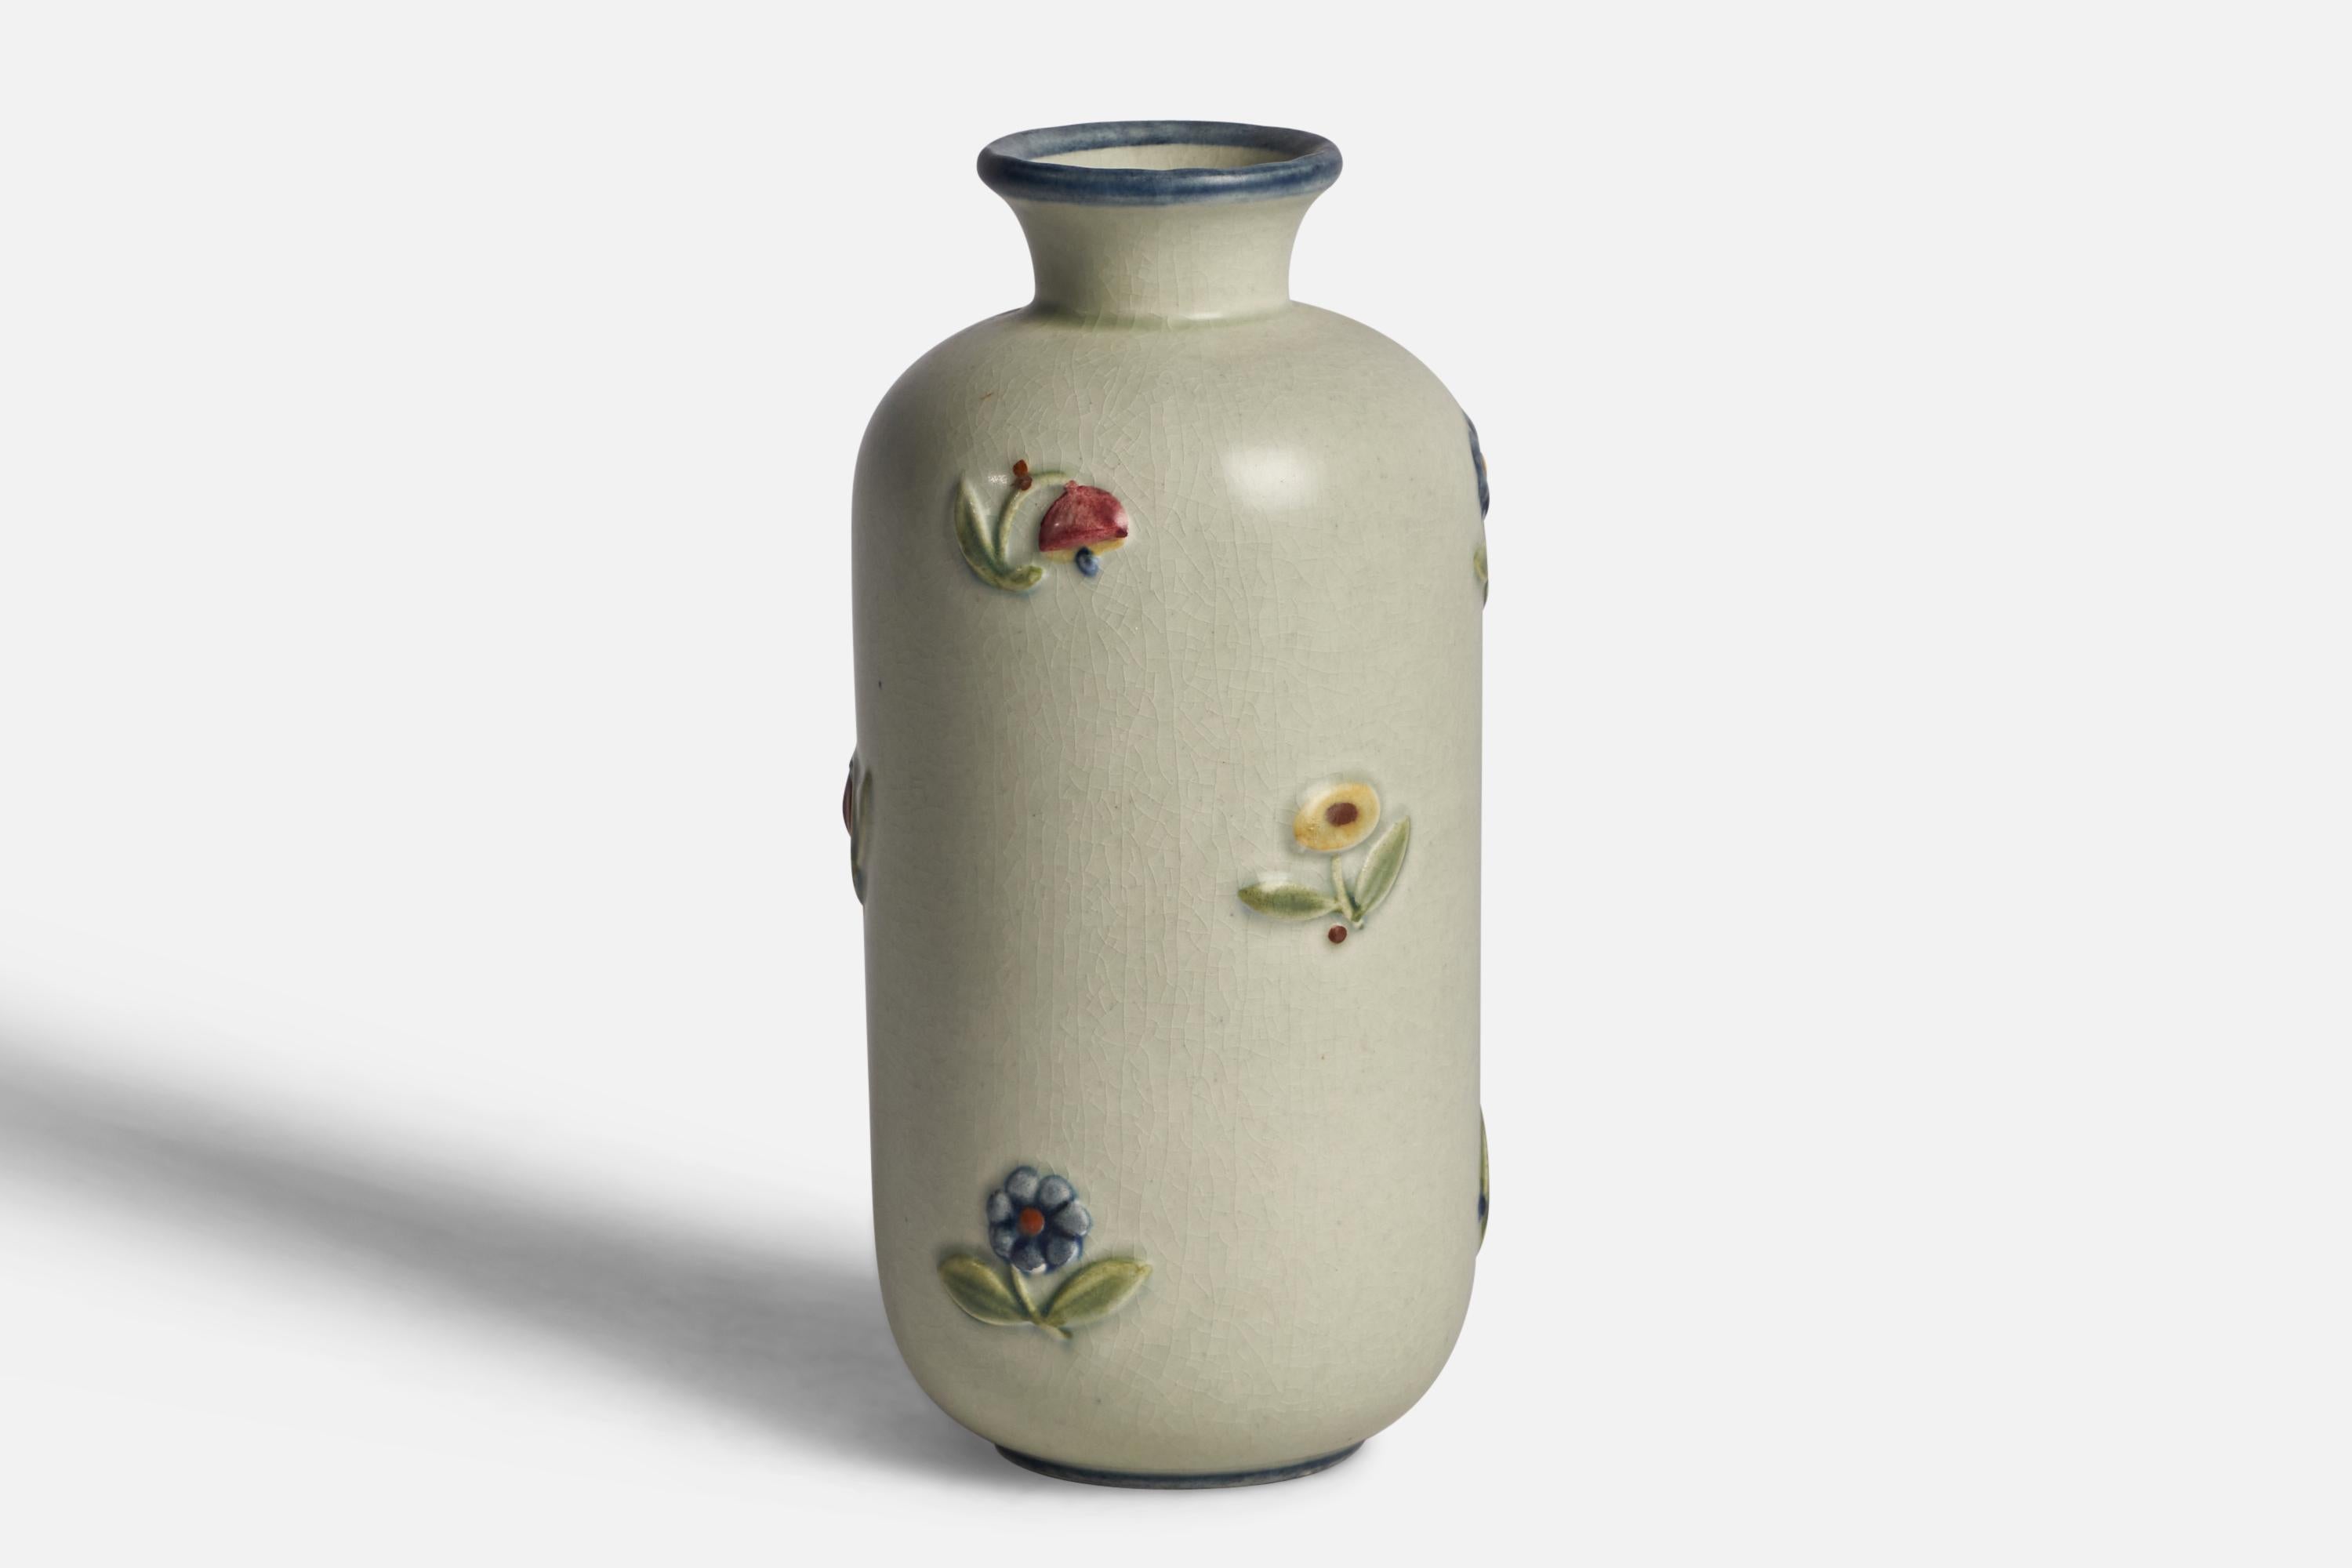 A handpainted white red and green stoneware vase designed by Getrud Lönegren, Sweden and produced by Rörstrand, 1940s.
